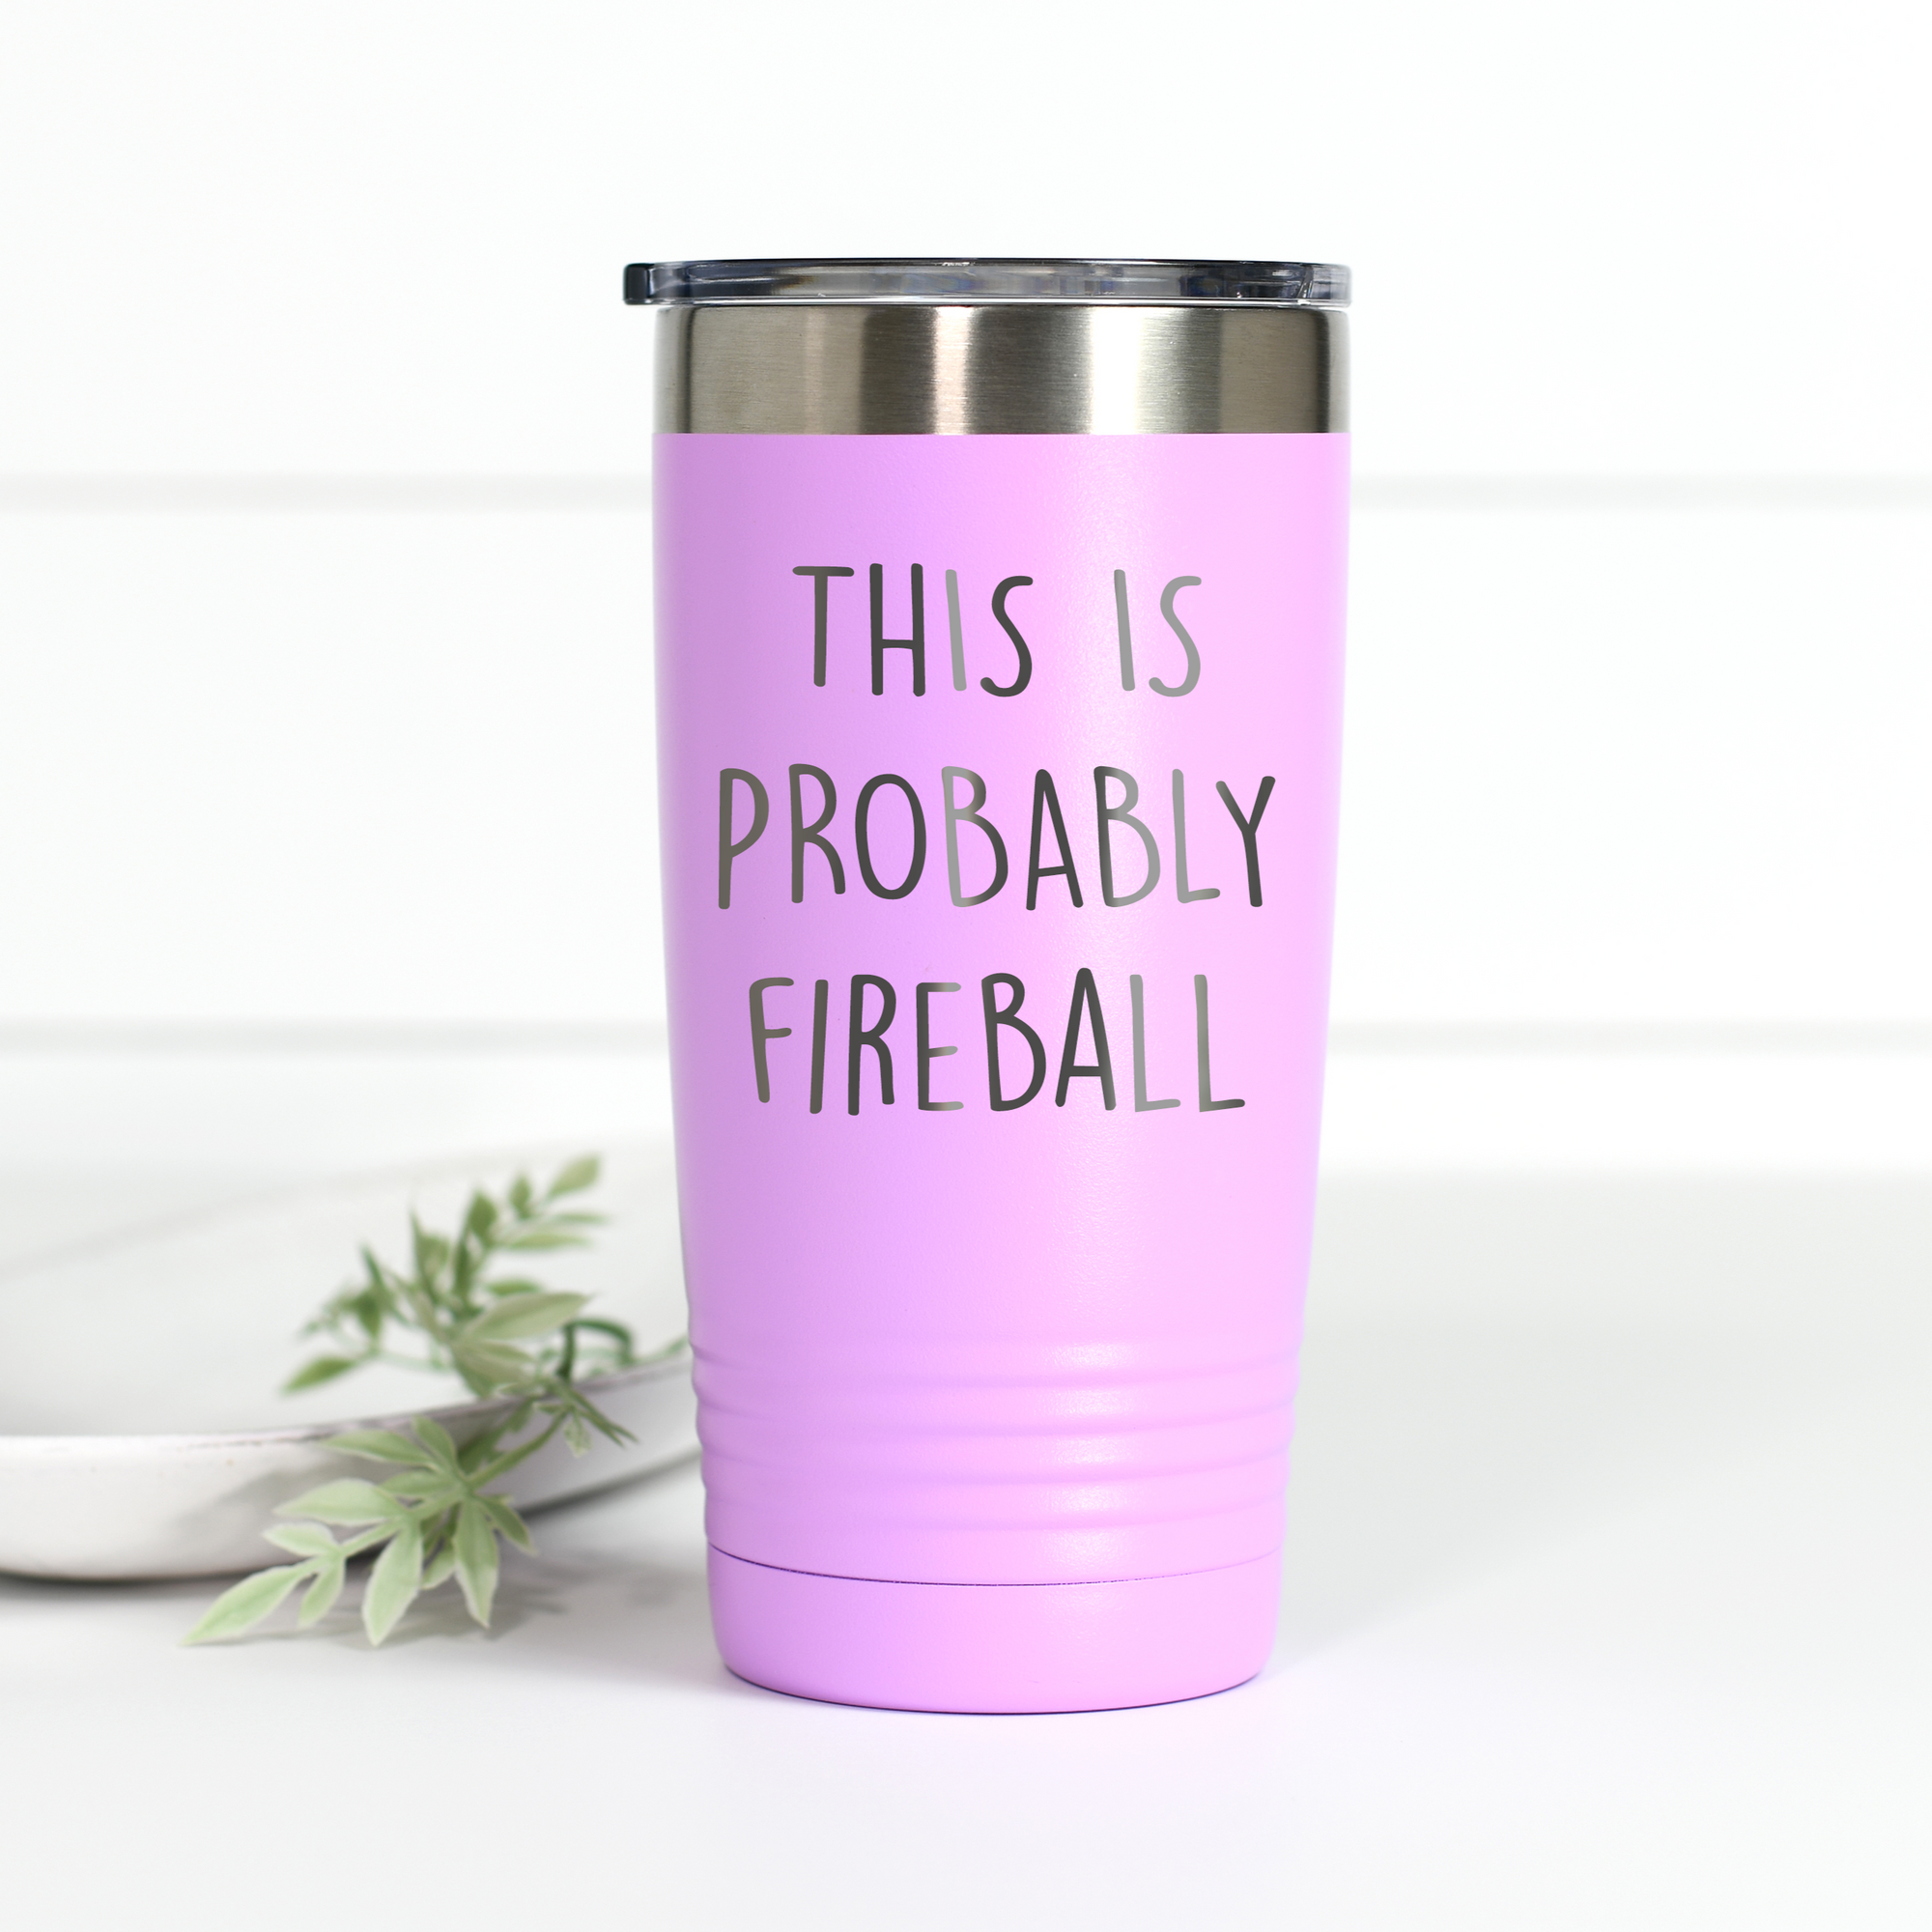 This is Probably Fireball 20 oz Engraved Tumbler